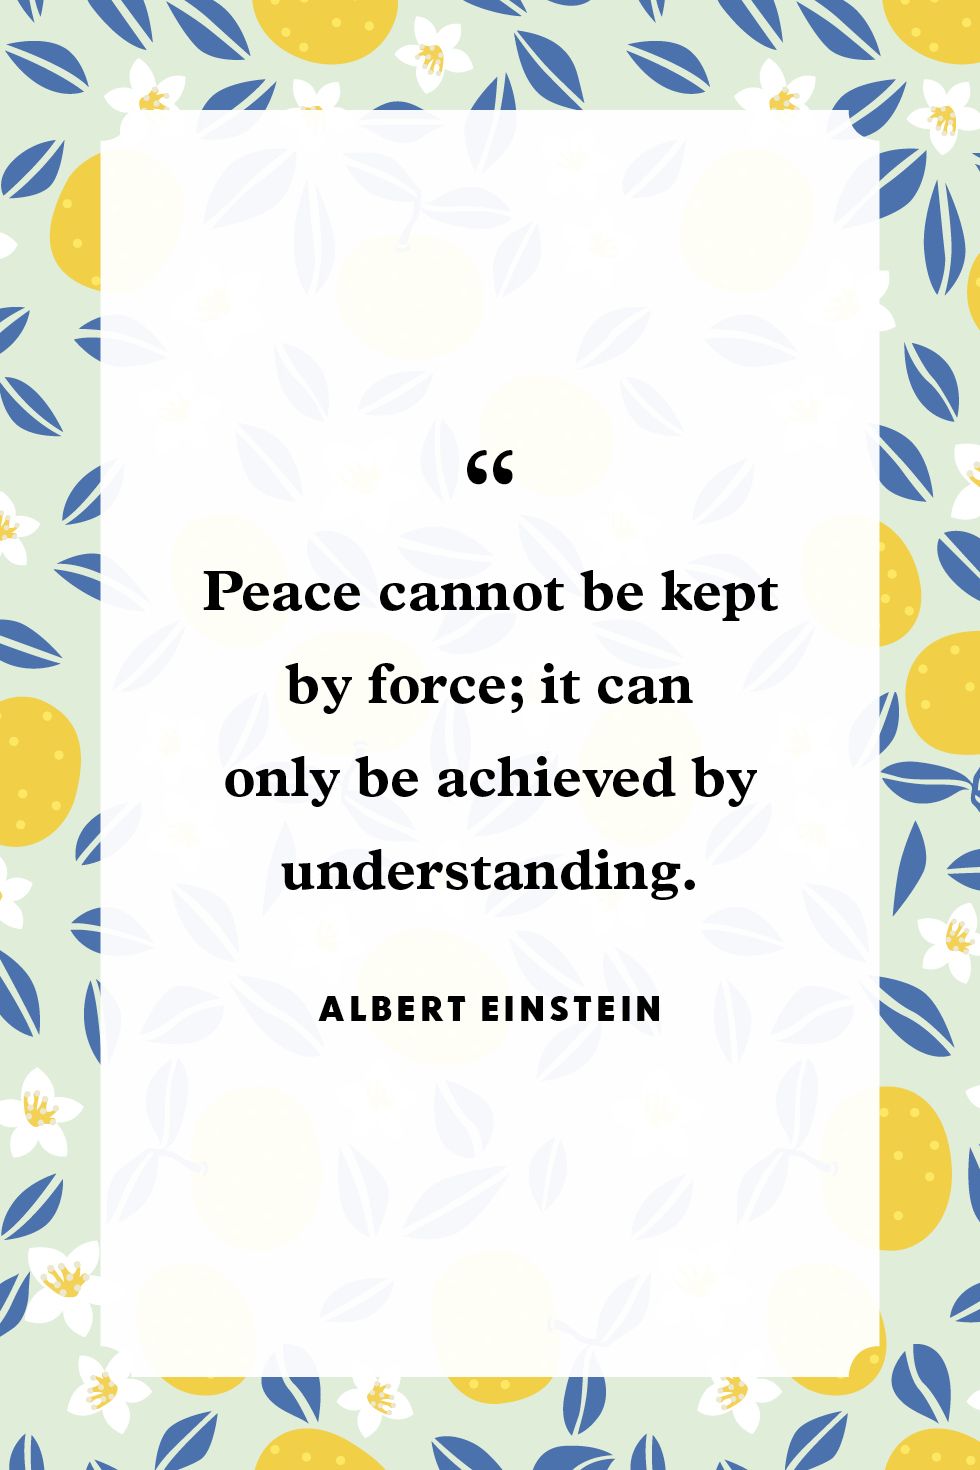 30 Best Peace Quotes - Quotes and Sayings about Peace and ...